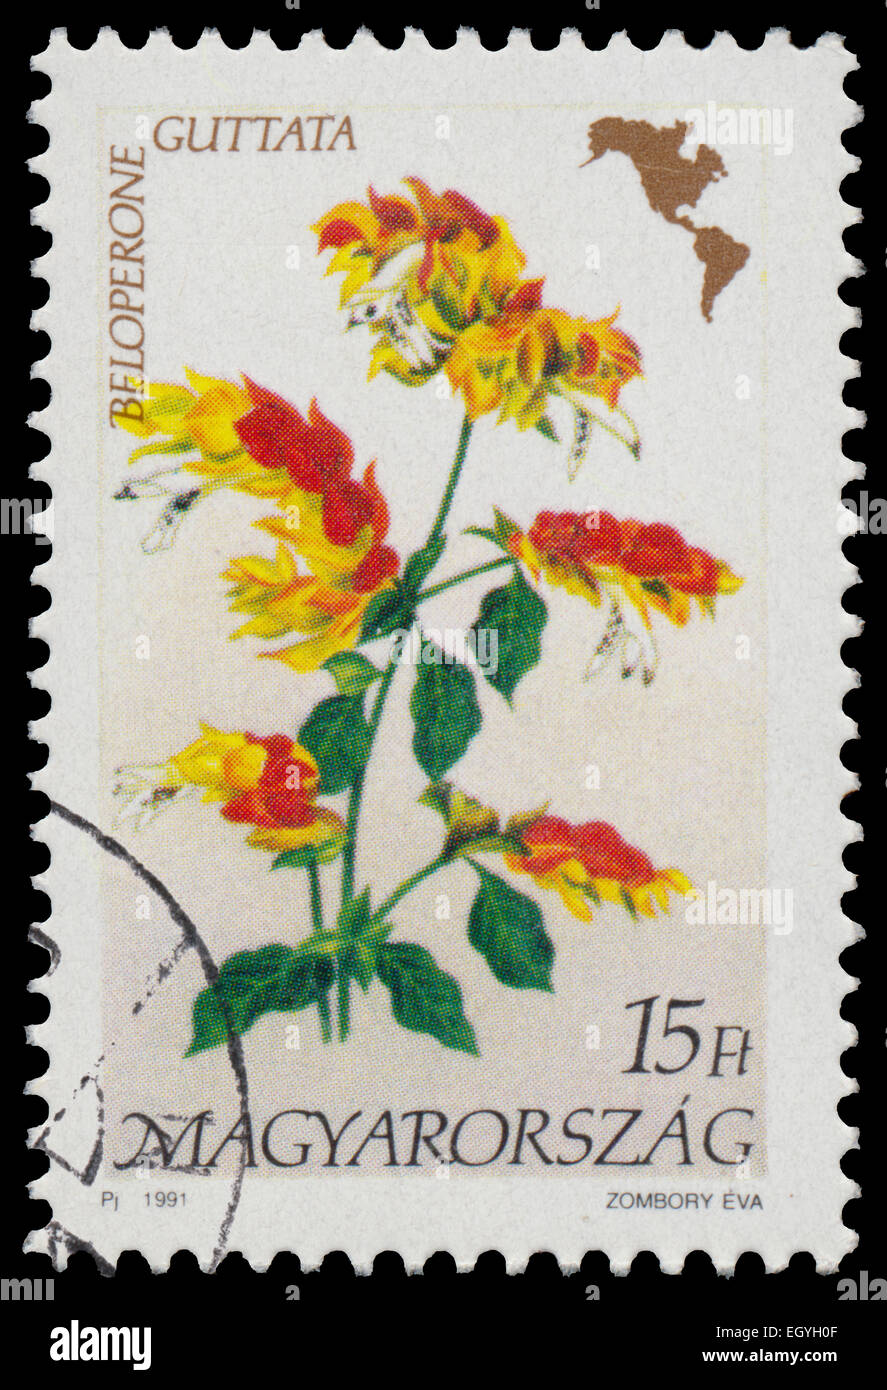 HUNGARY - CIRCA 1991: Stamp printed in Hungary, shows Flower Beloperone guttata, with the same inscriptions, from the series 'Am Stock Photo